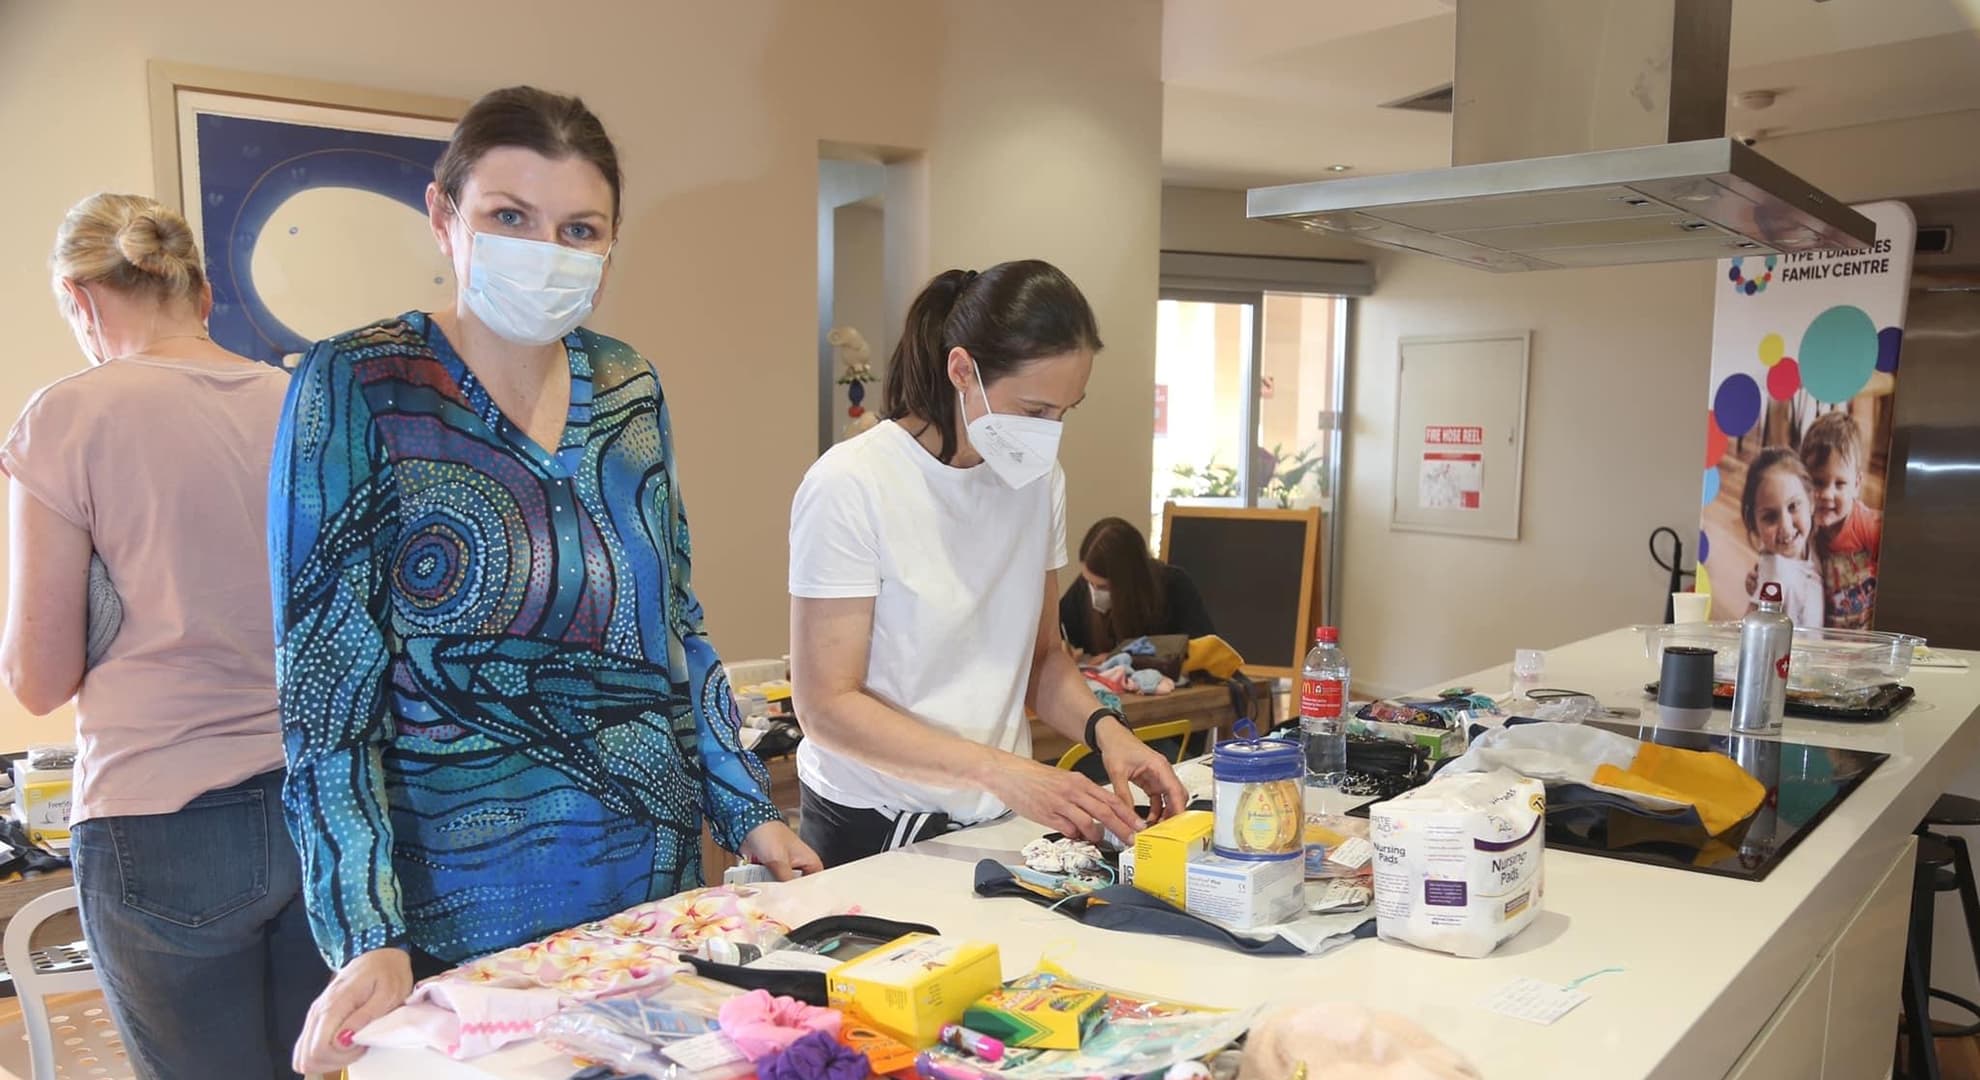 Lady standing at a table looking at camera in COVID face mask, another lady sorting out items on a table